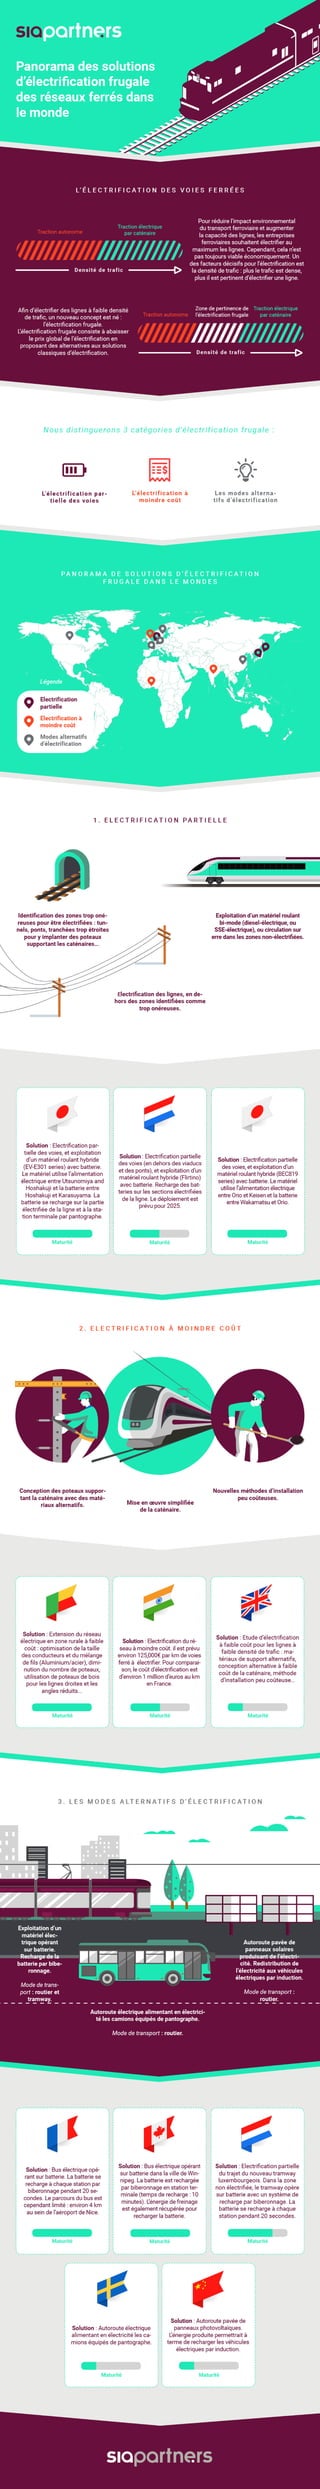 Infographie Sia Partners - Electrification frugale